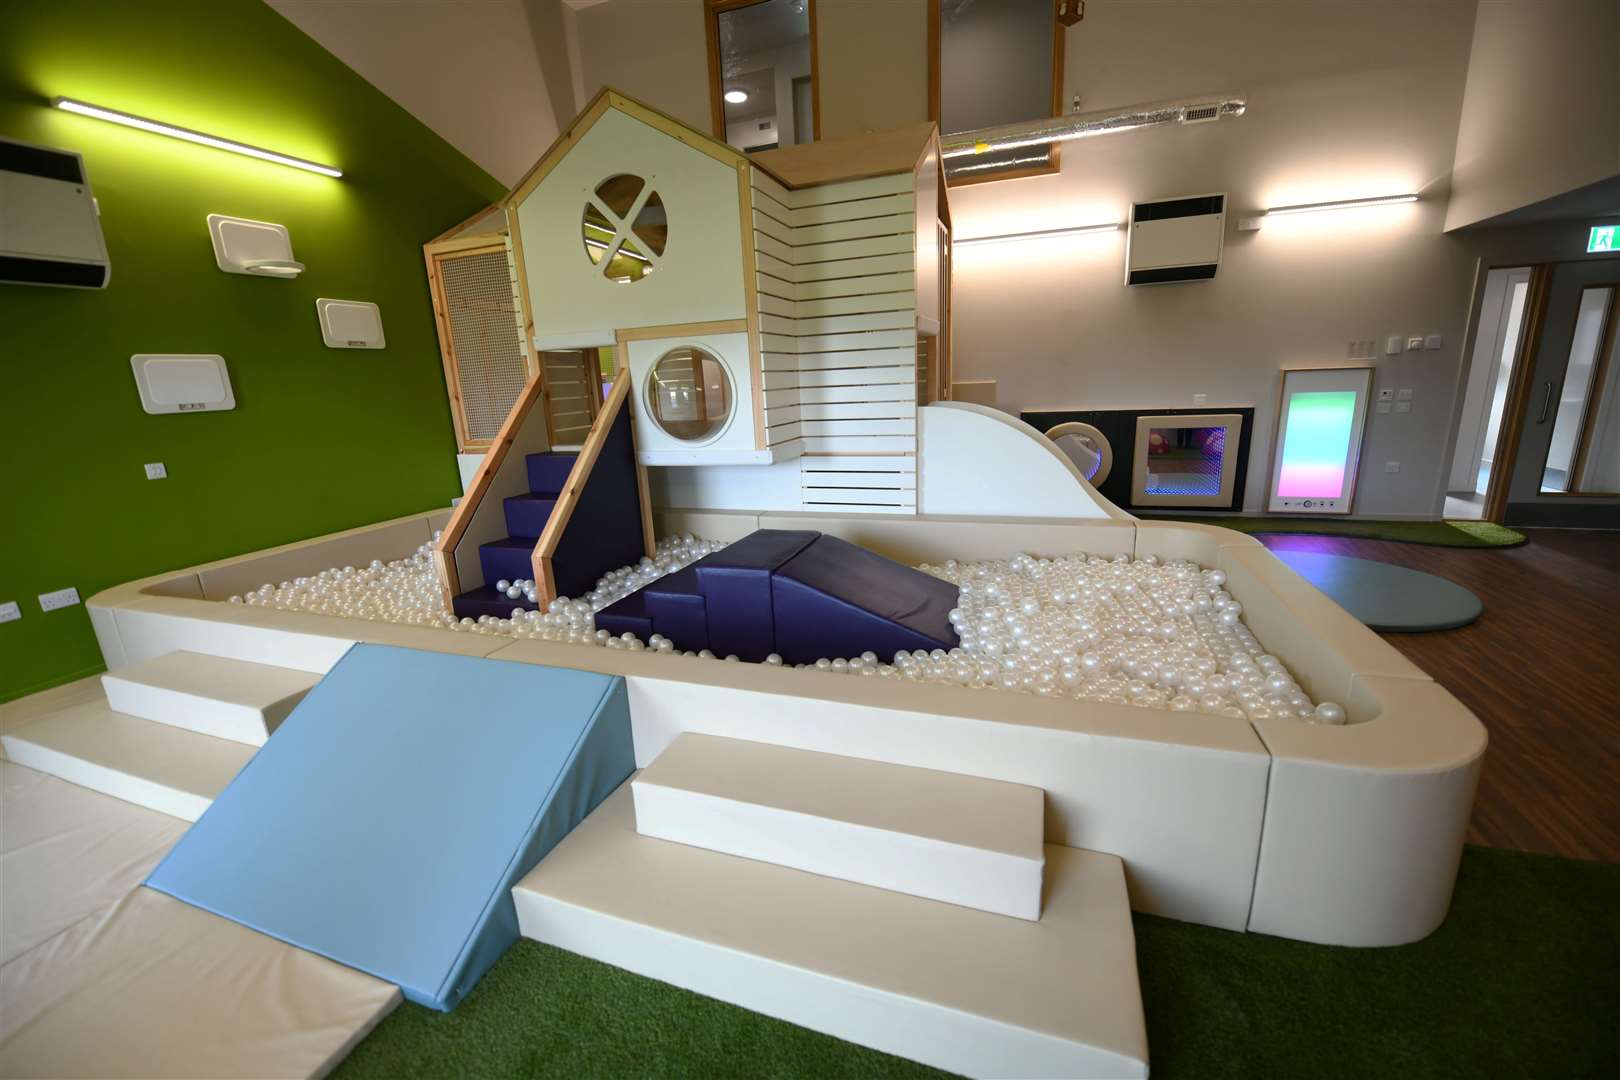 The specially-designed play area at the centre.